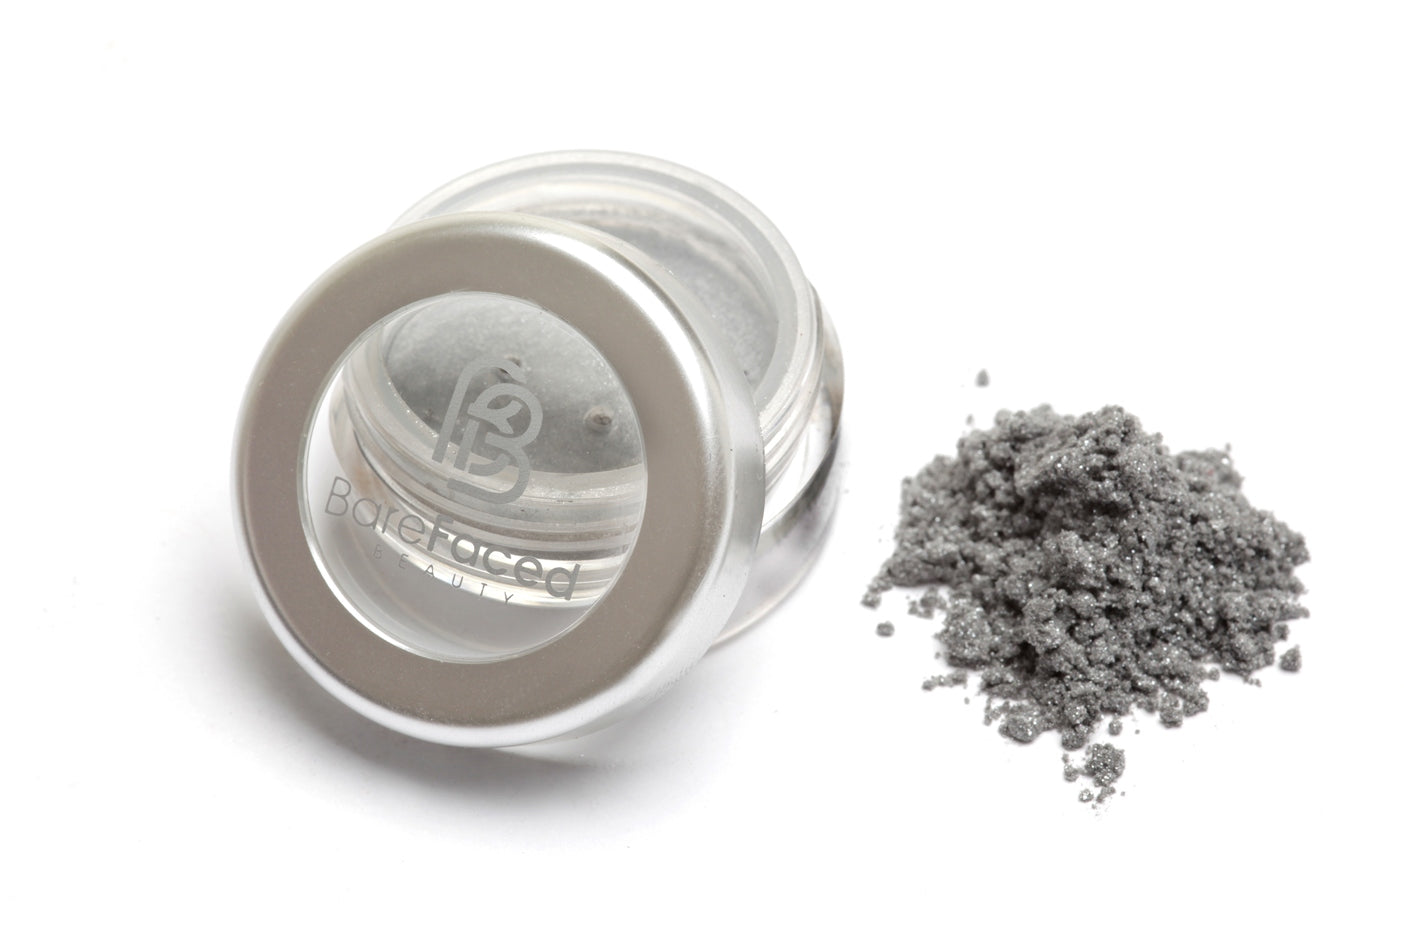 A small round pot of mineral eyeshadow, with a swatch of the powder next to it showing a sparkling silver grey shade